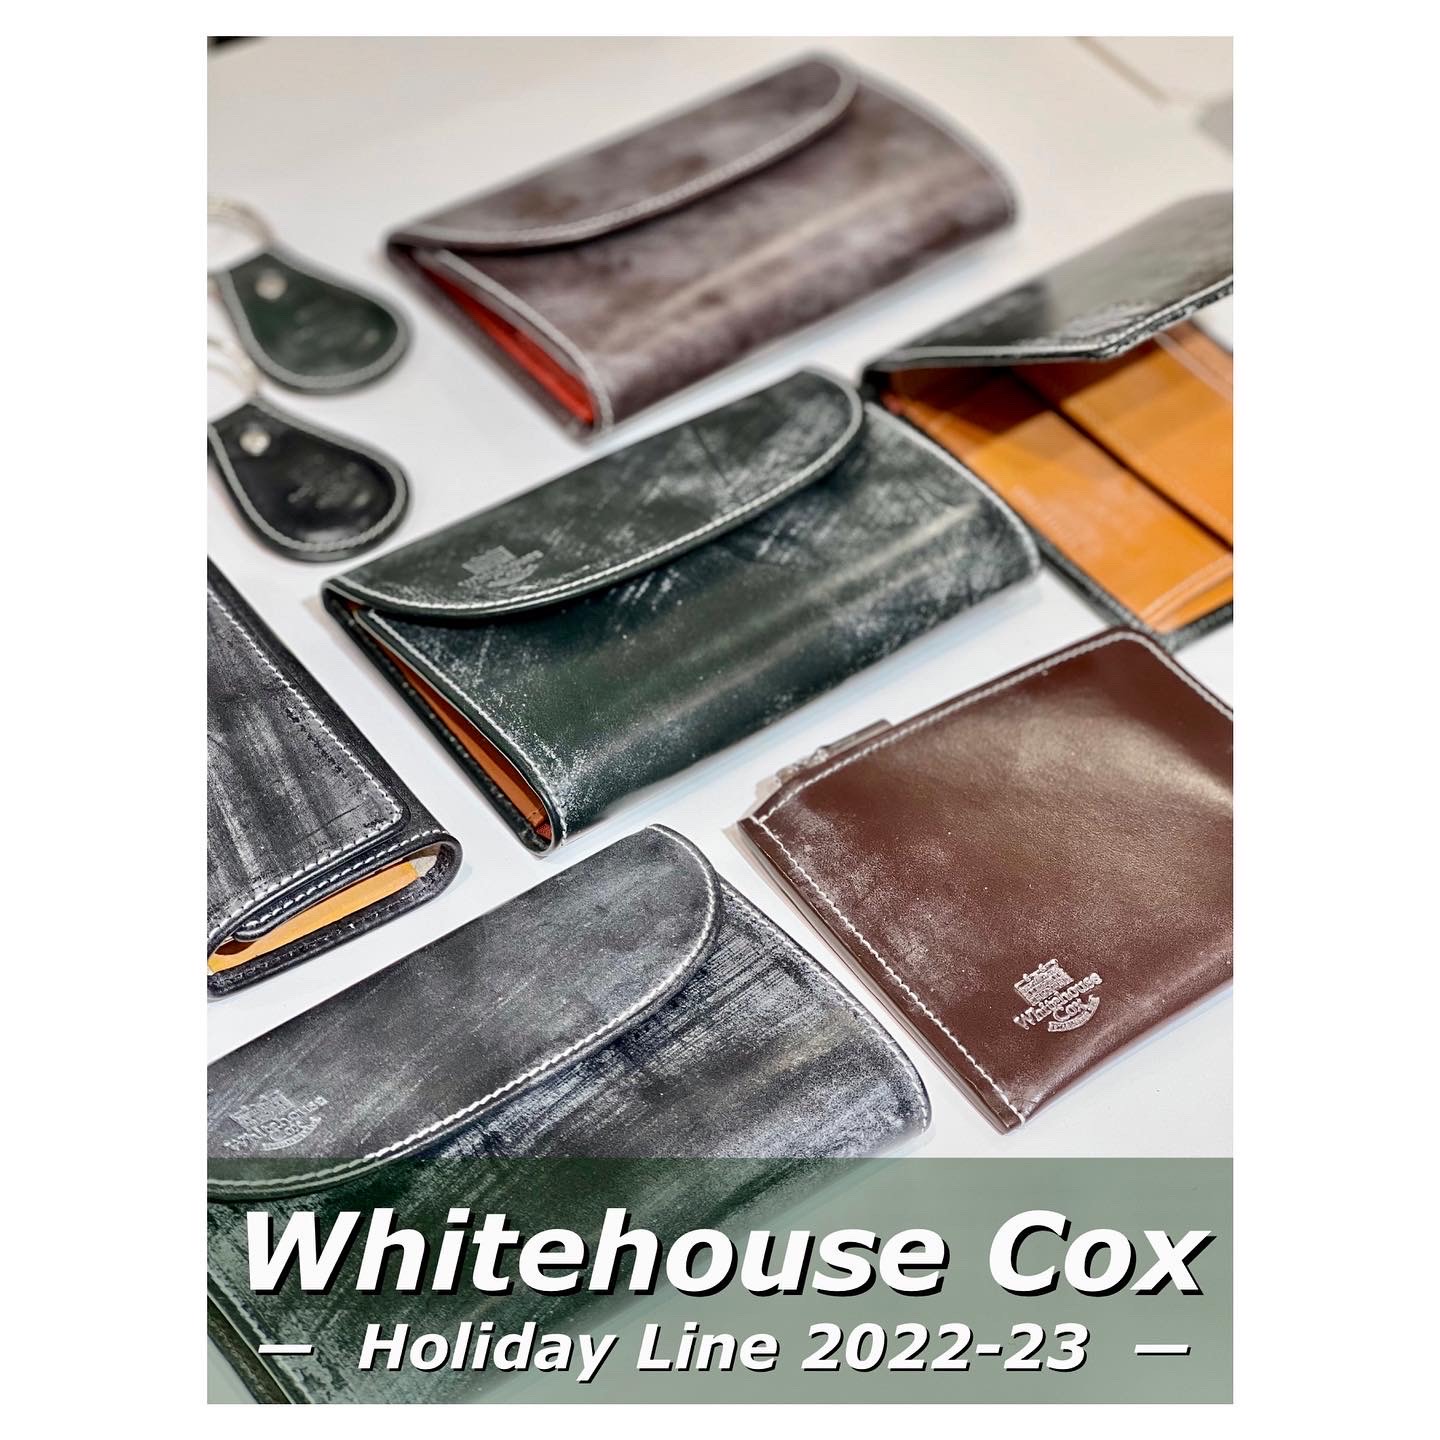 Whitehouse Cox Holiday Line 2022-23 | 売場ニュース | 博多阪急